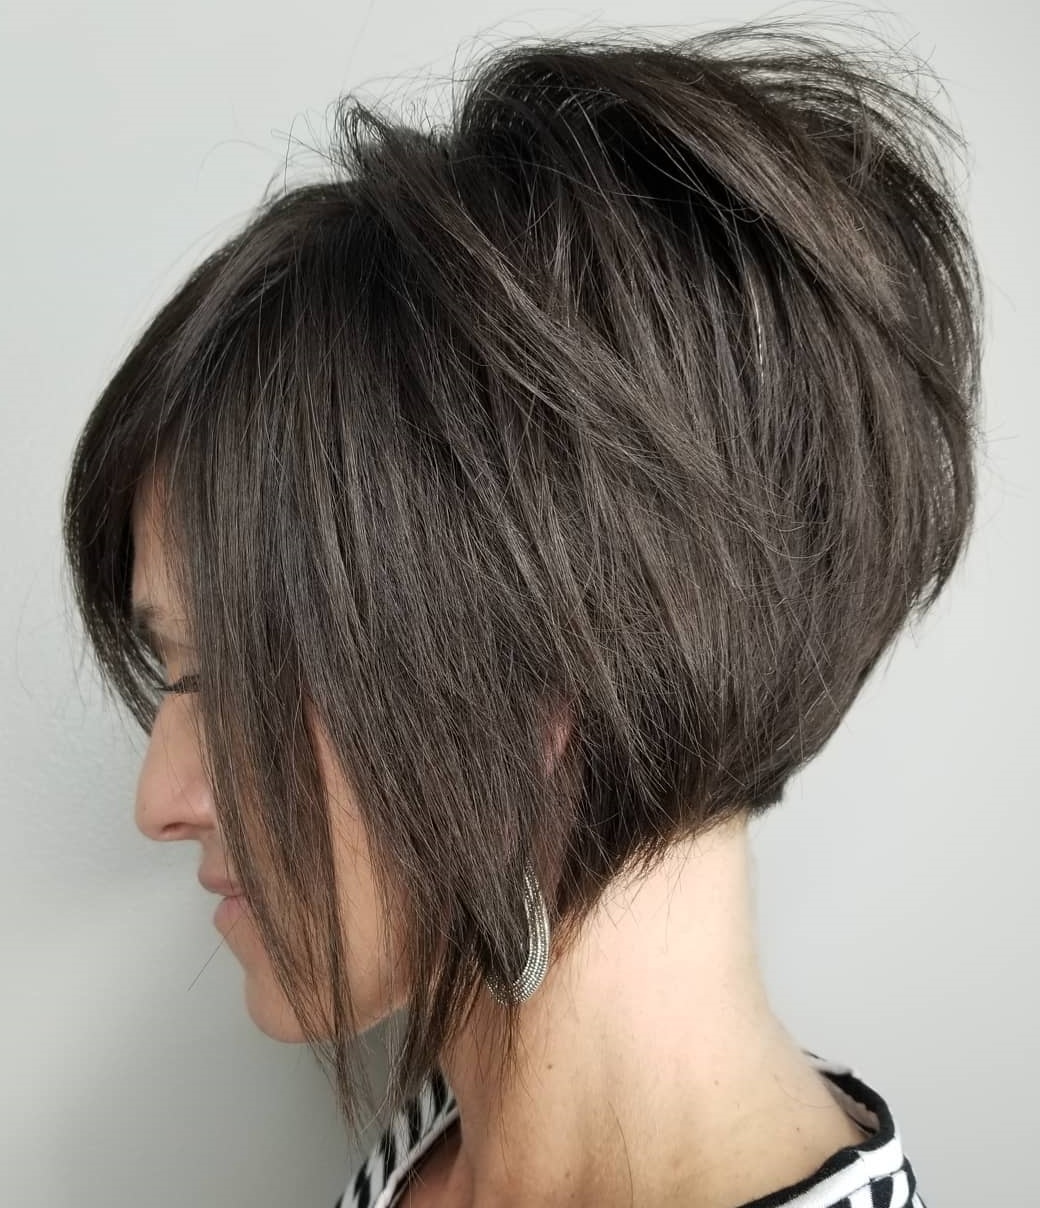 35 Captivating Short Hairstyles for Thick Hair You'll Want to Don in 2023